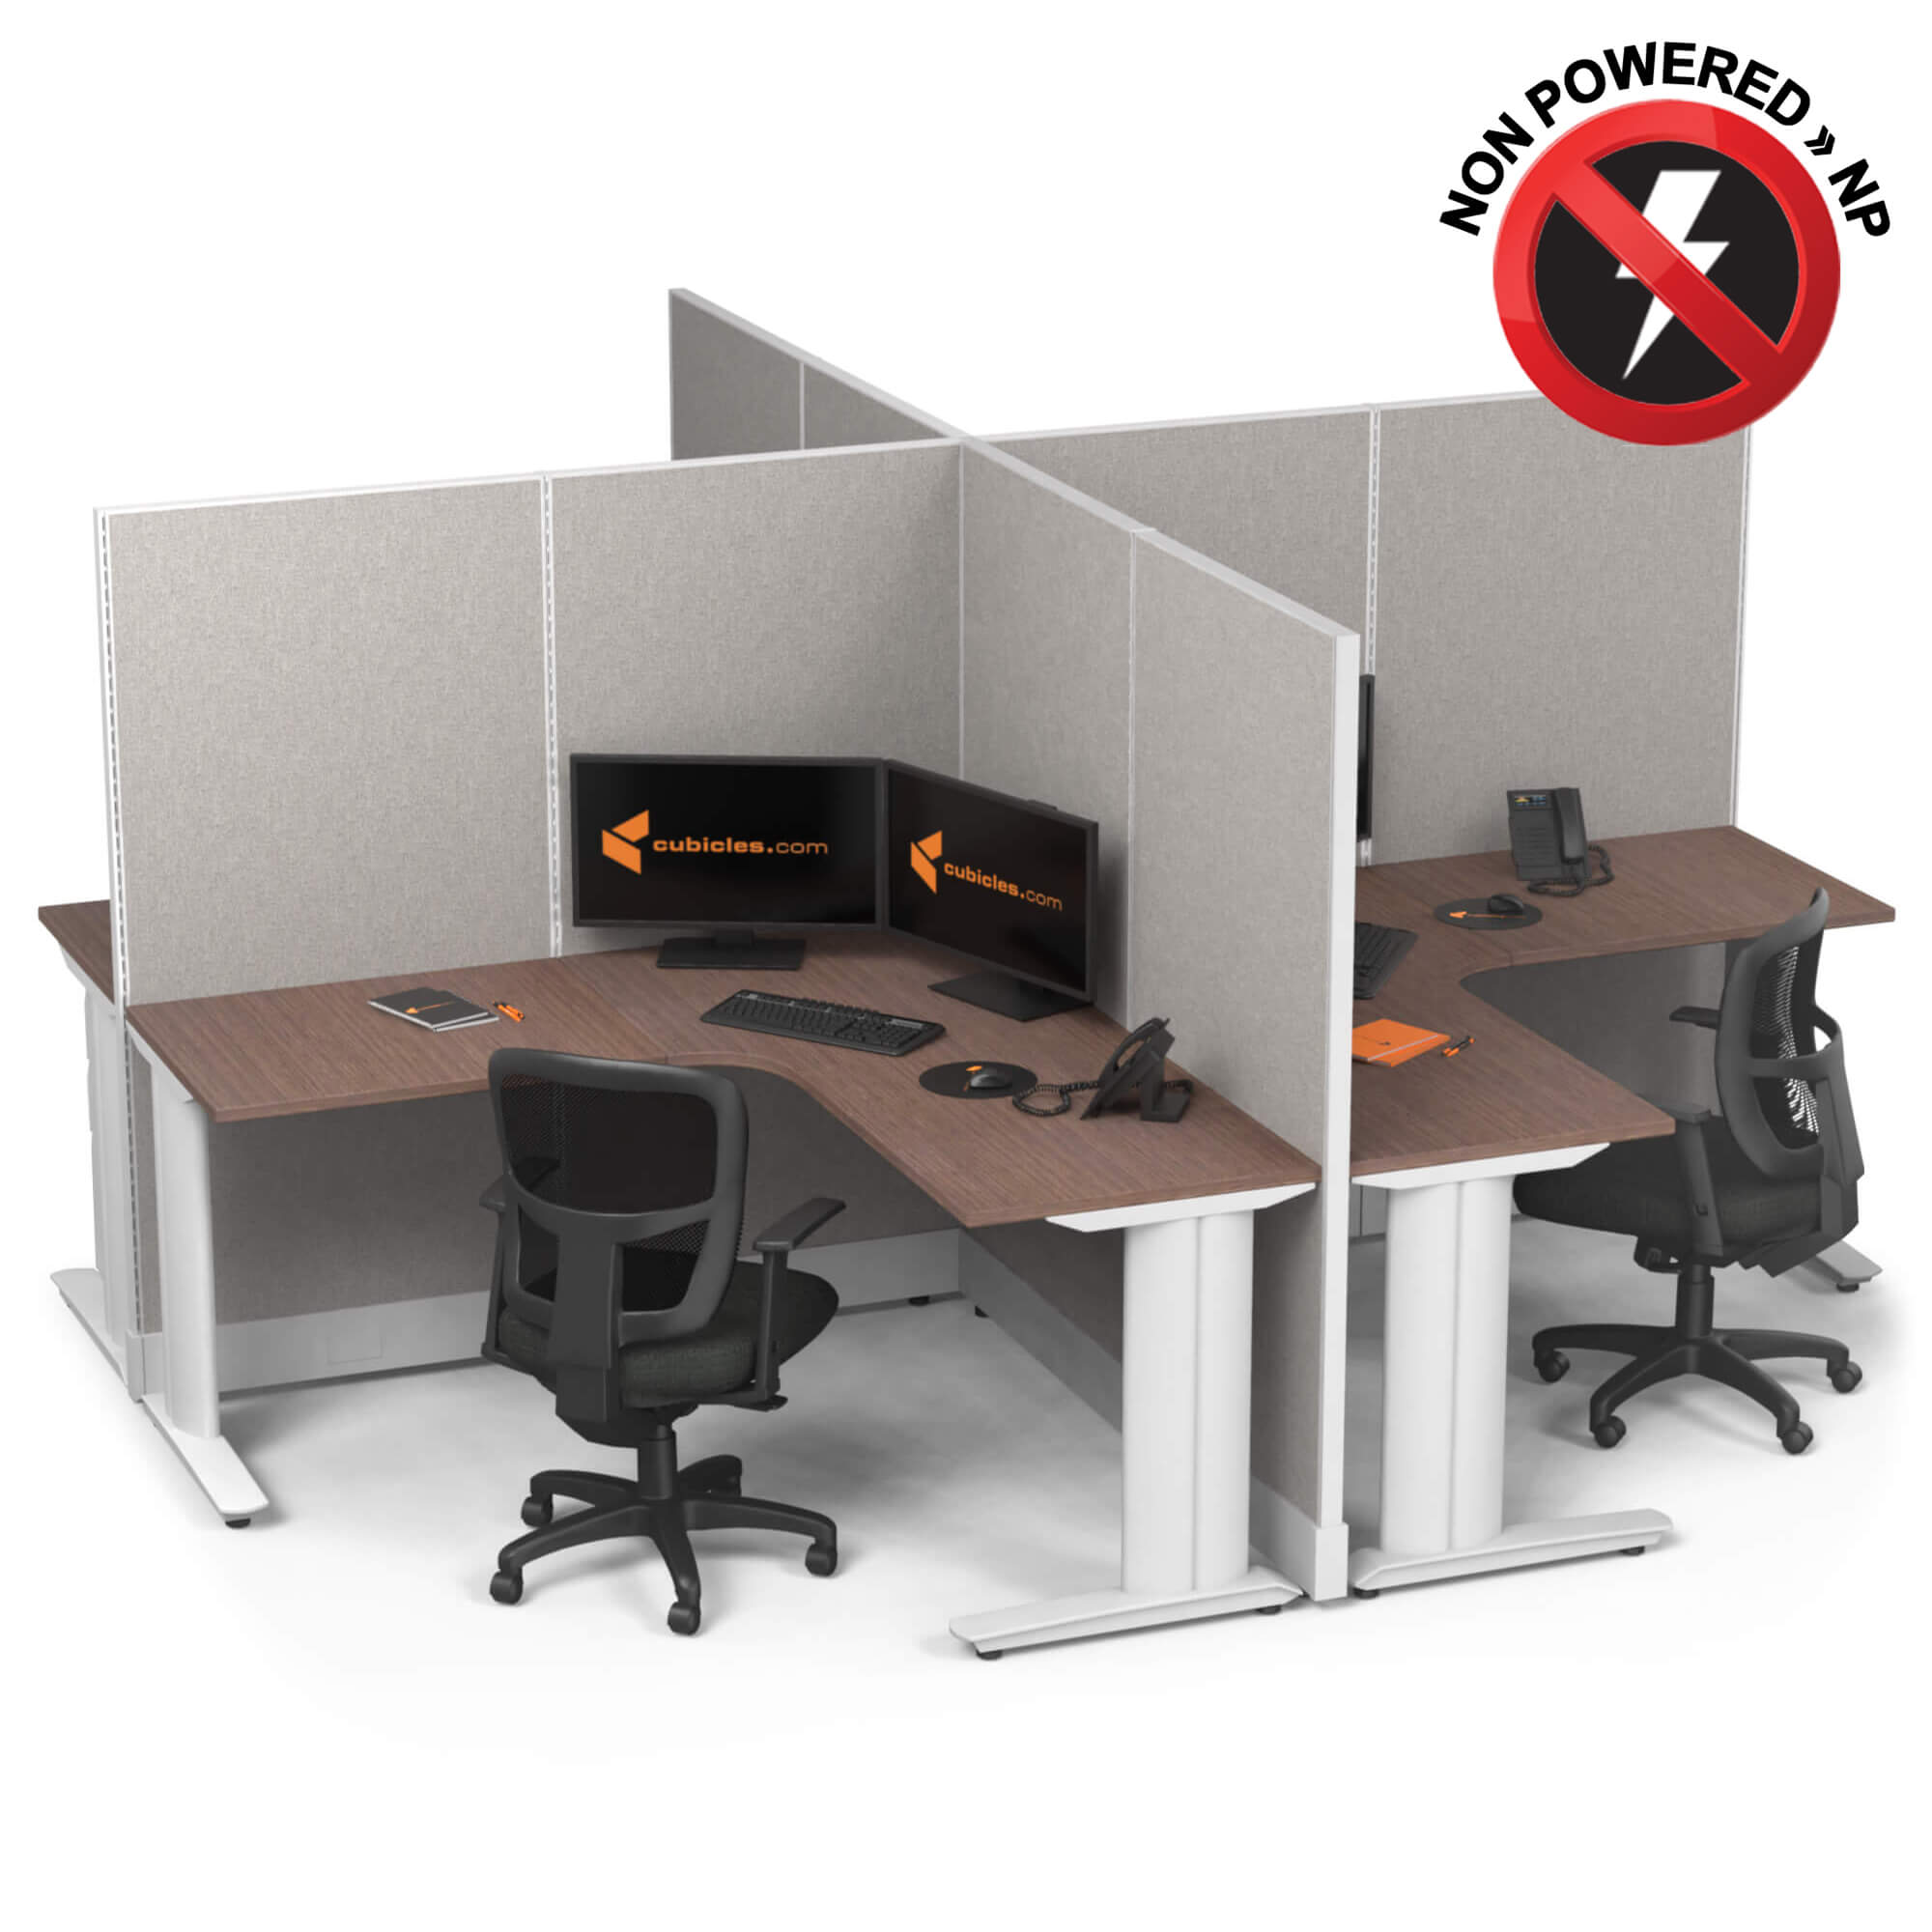 cubicle-desk-x-cluster-workstation-non-powered-sign.jpg